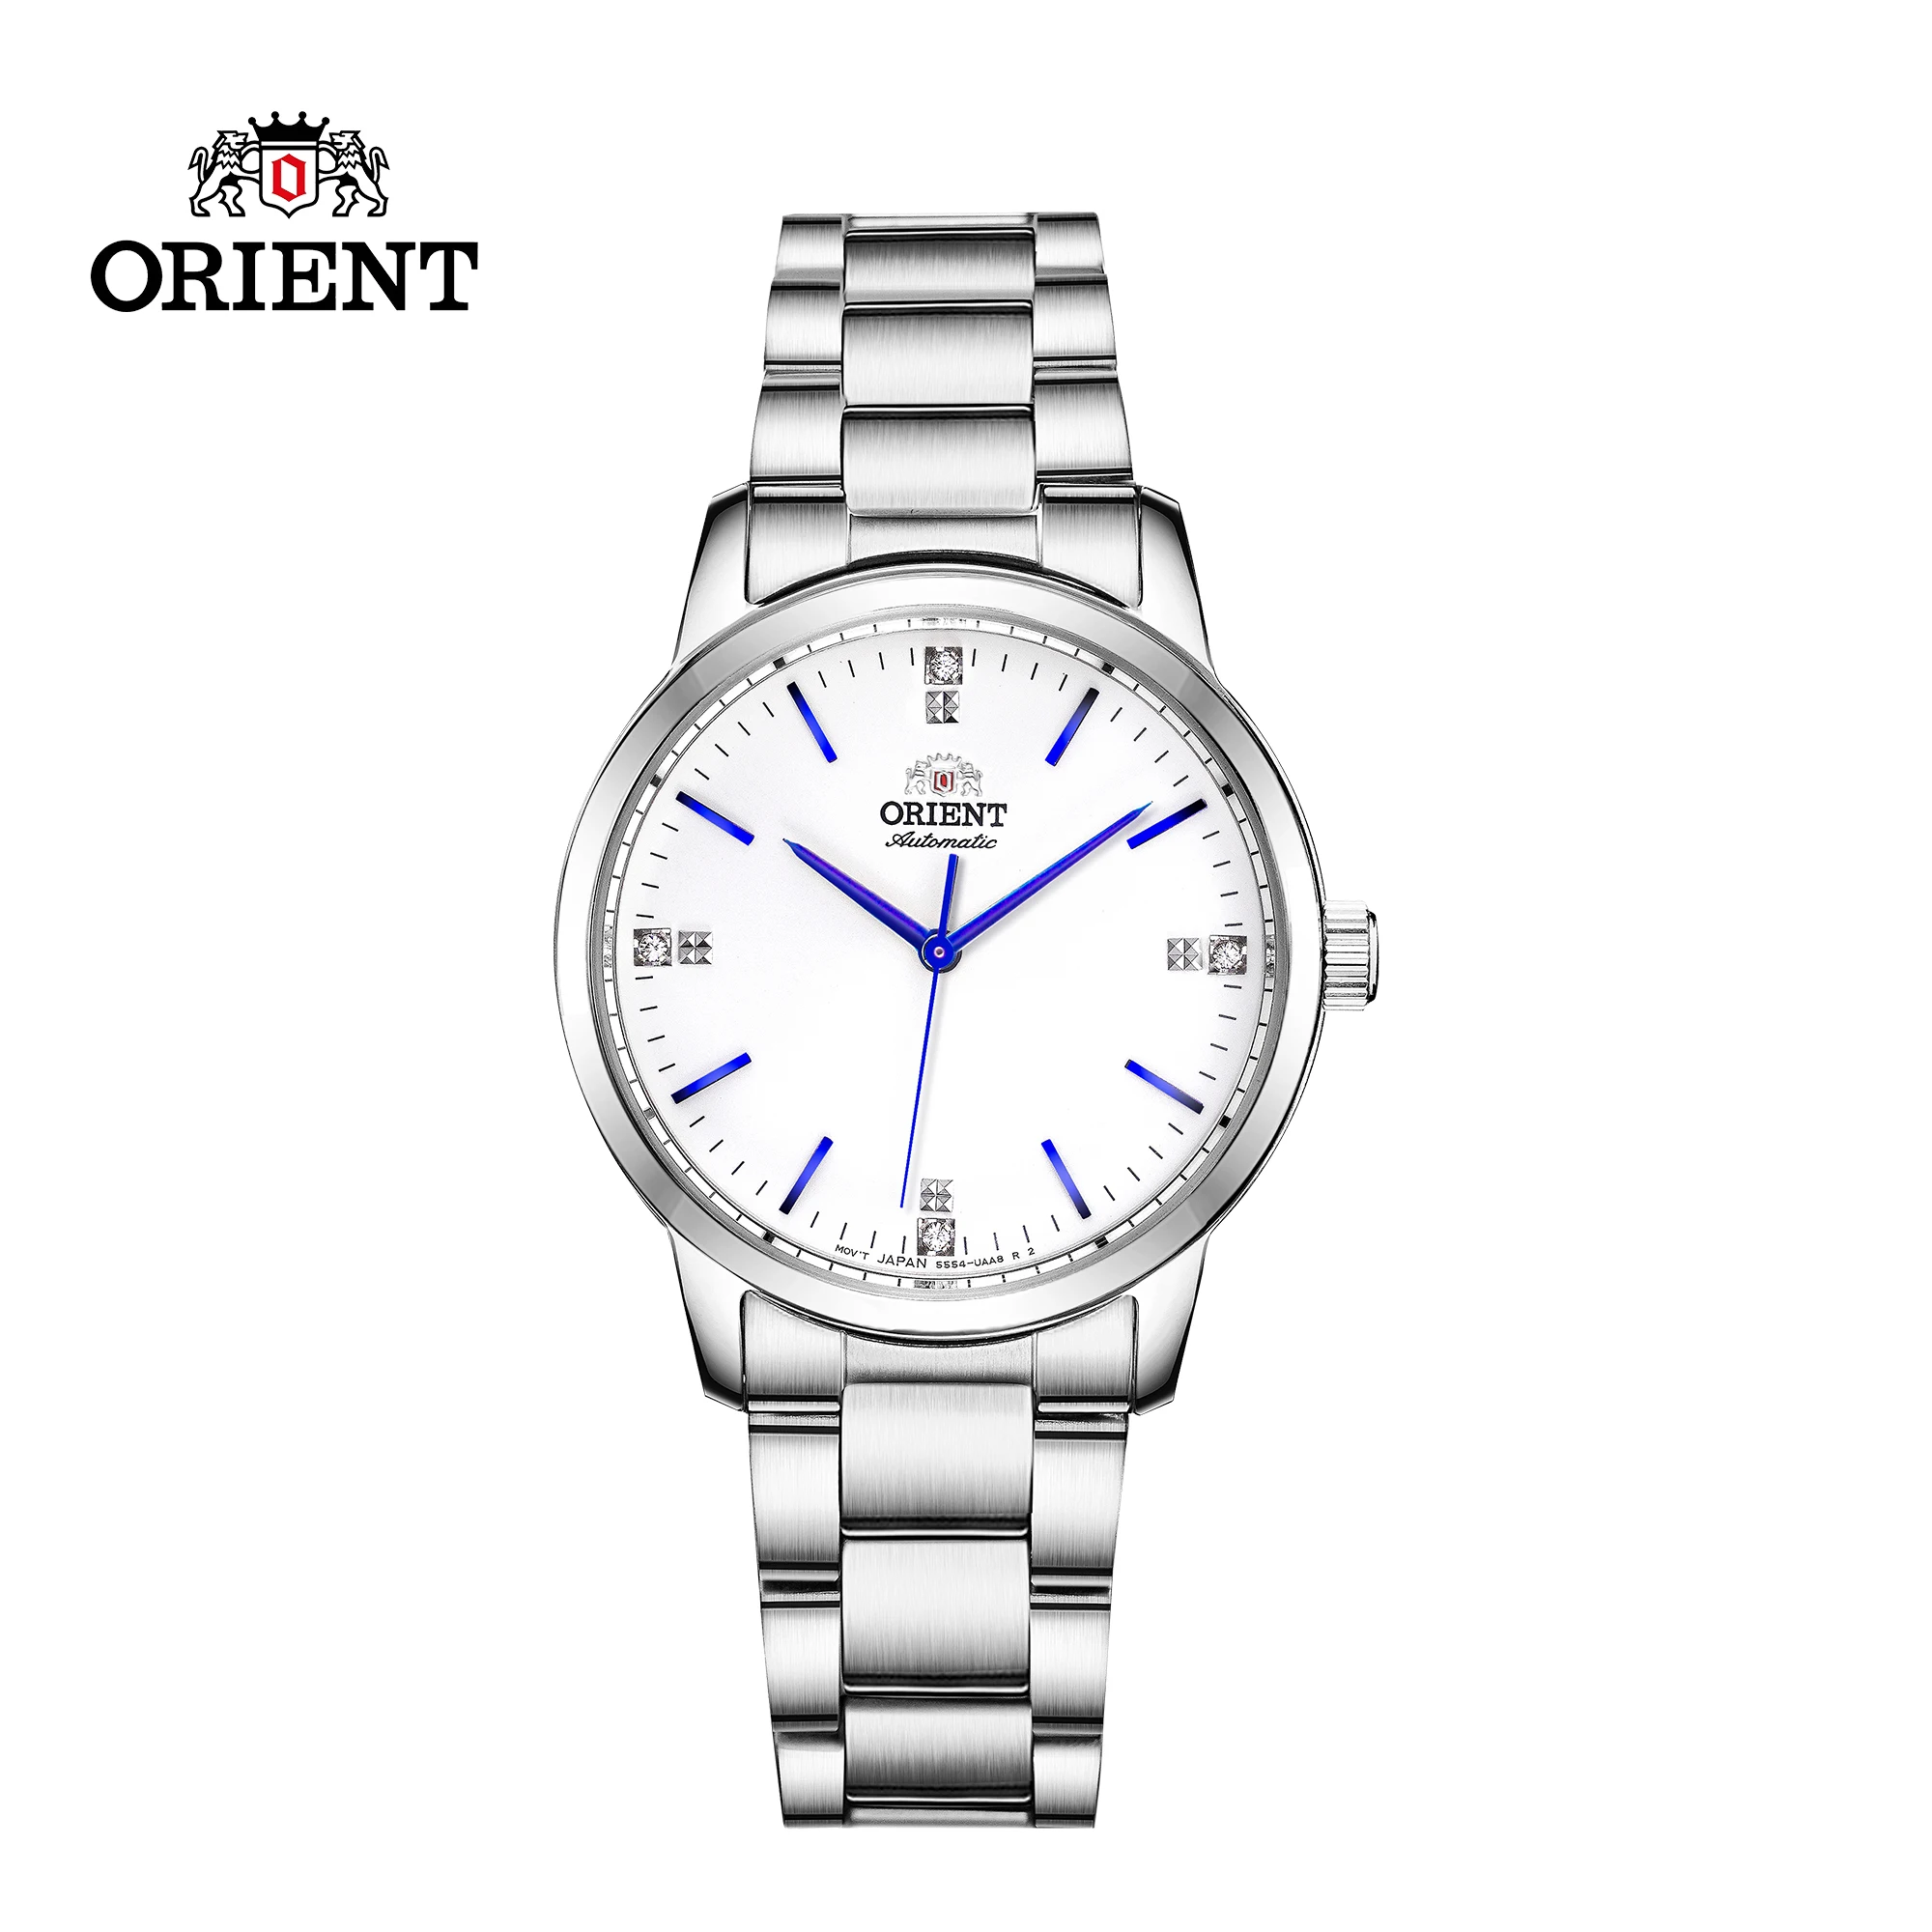 Enlarge ORIENT Classic Women's Dress Watch, Japanese 32mm Dial Wrist Watch for Women Automatic Mechanical Watch /RA-AB01